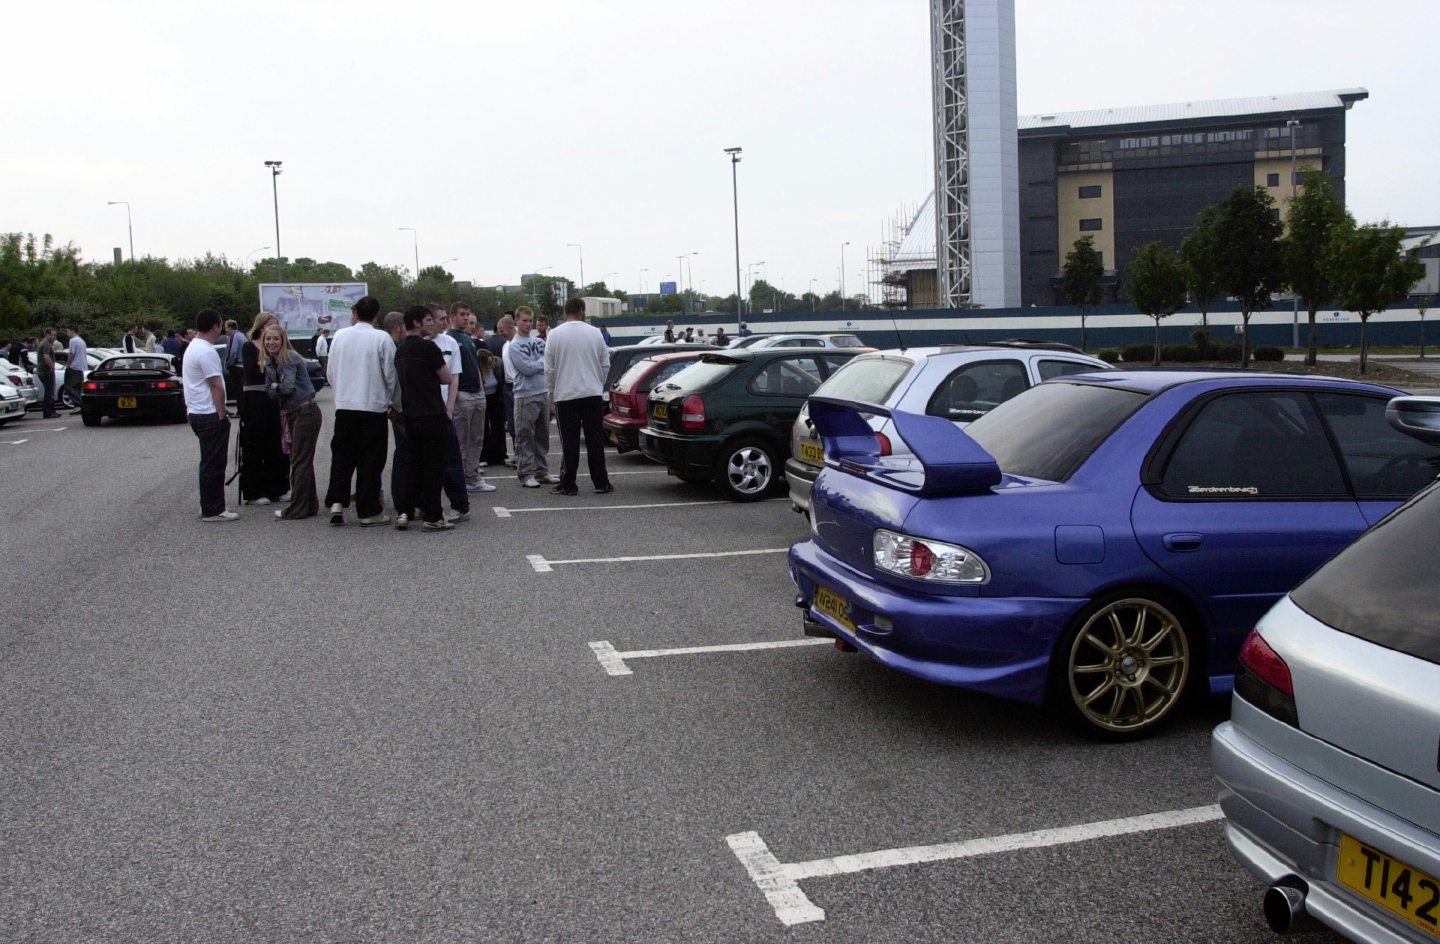 People crowded around some of the cars during a meet-up at the AECC in 2004